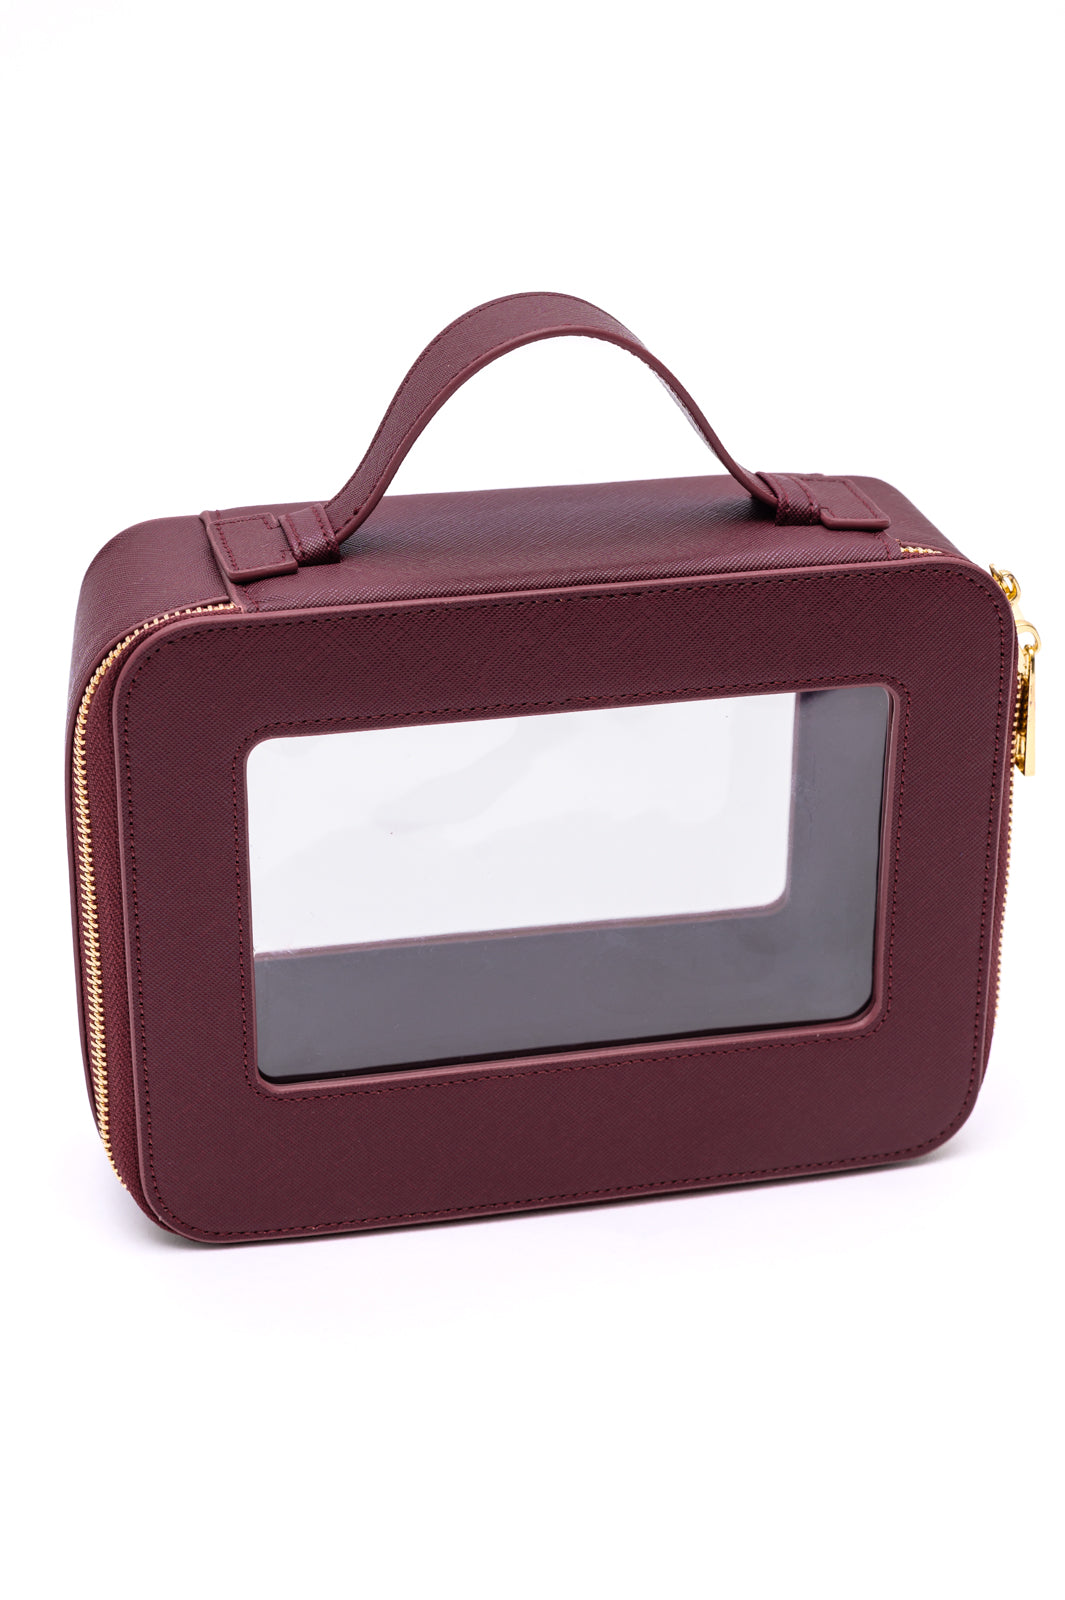 PU Leather Travel Cosmetic Case in Wine ~ Online Exclusive